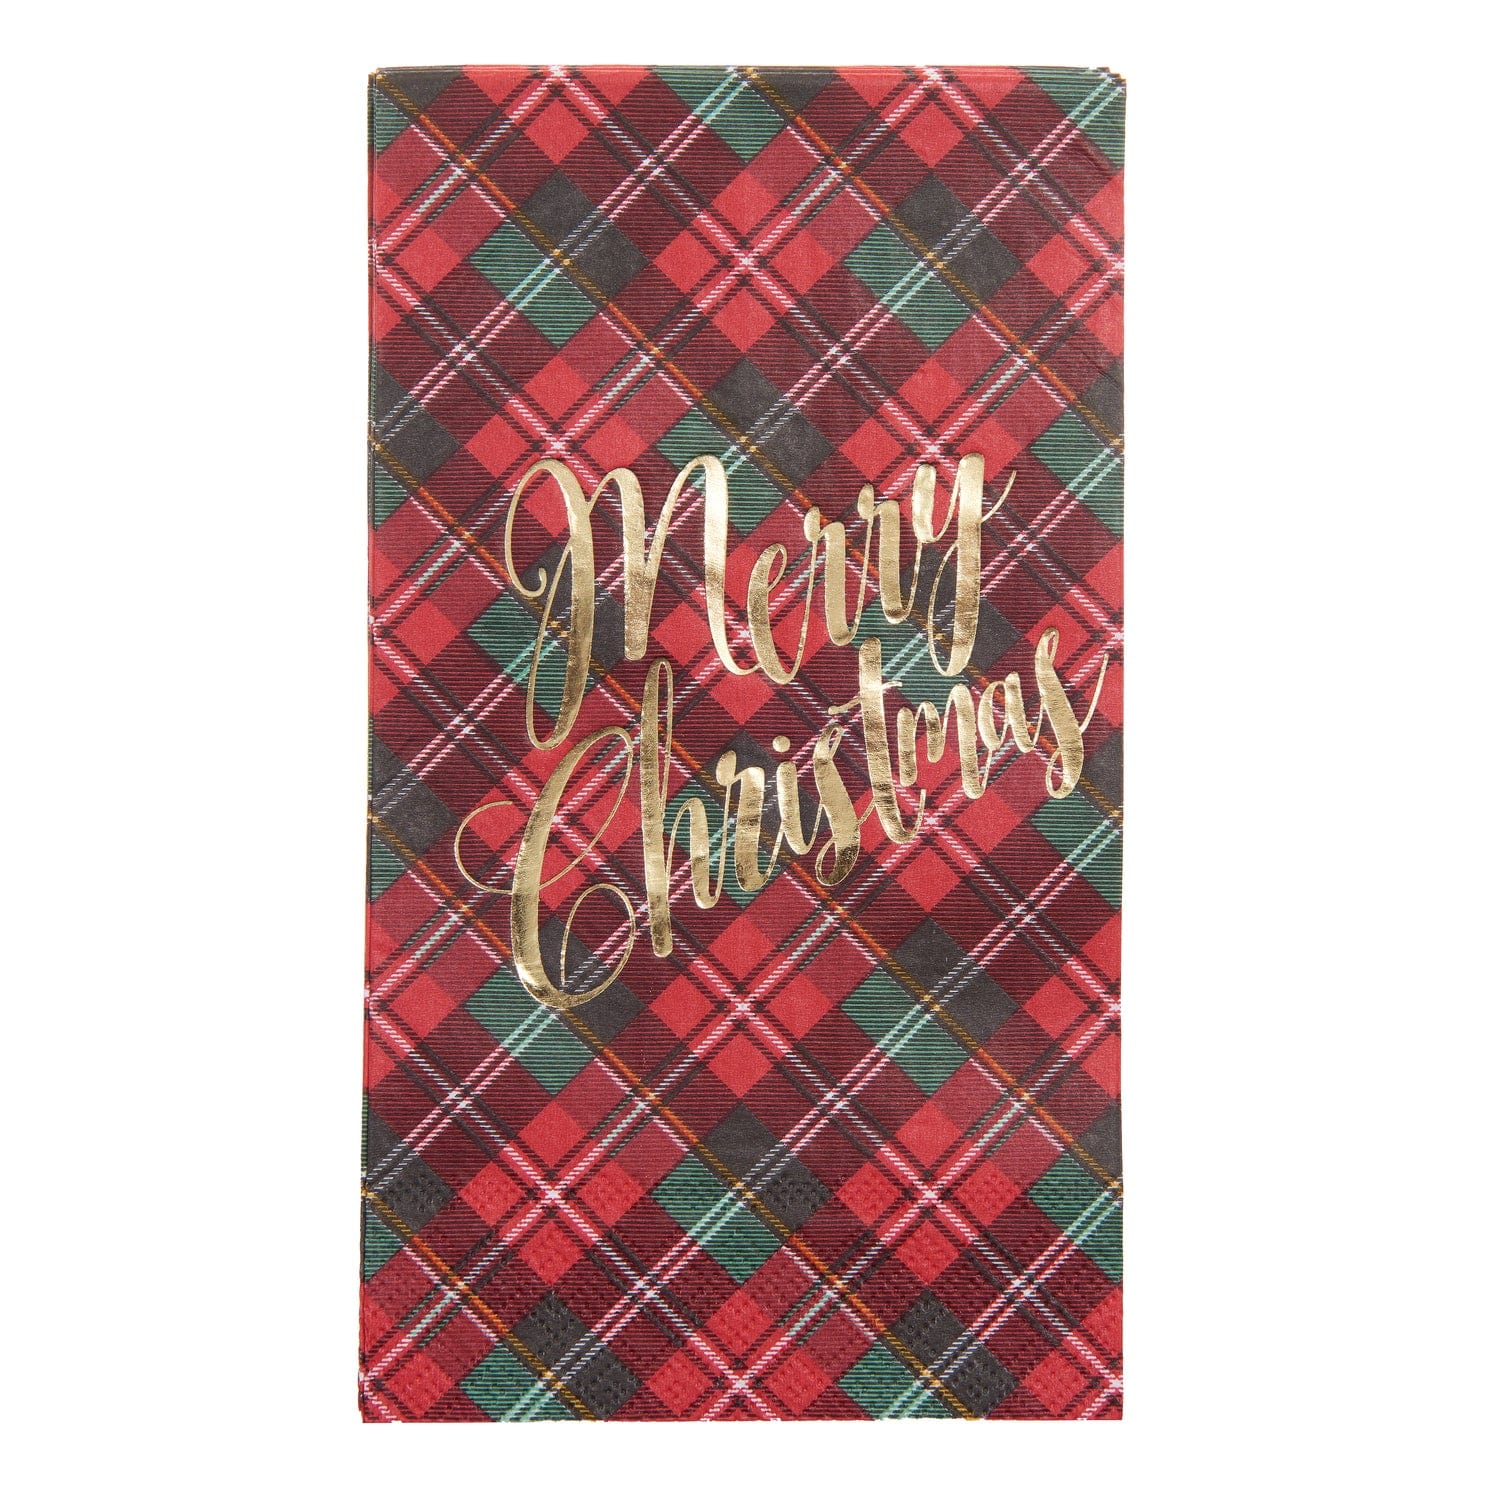 Red Plaid Dinner Napkins - 32 Count Roobee Napkins 37201